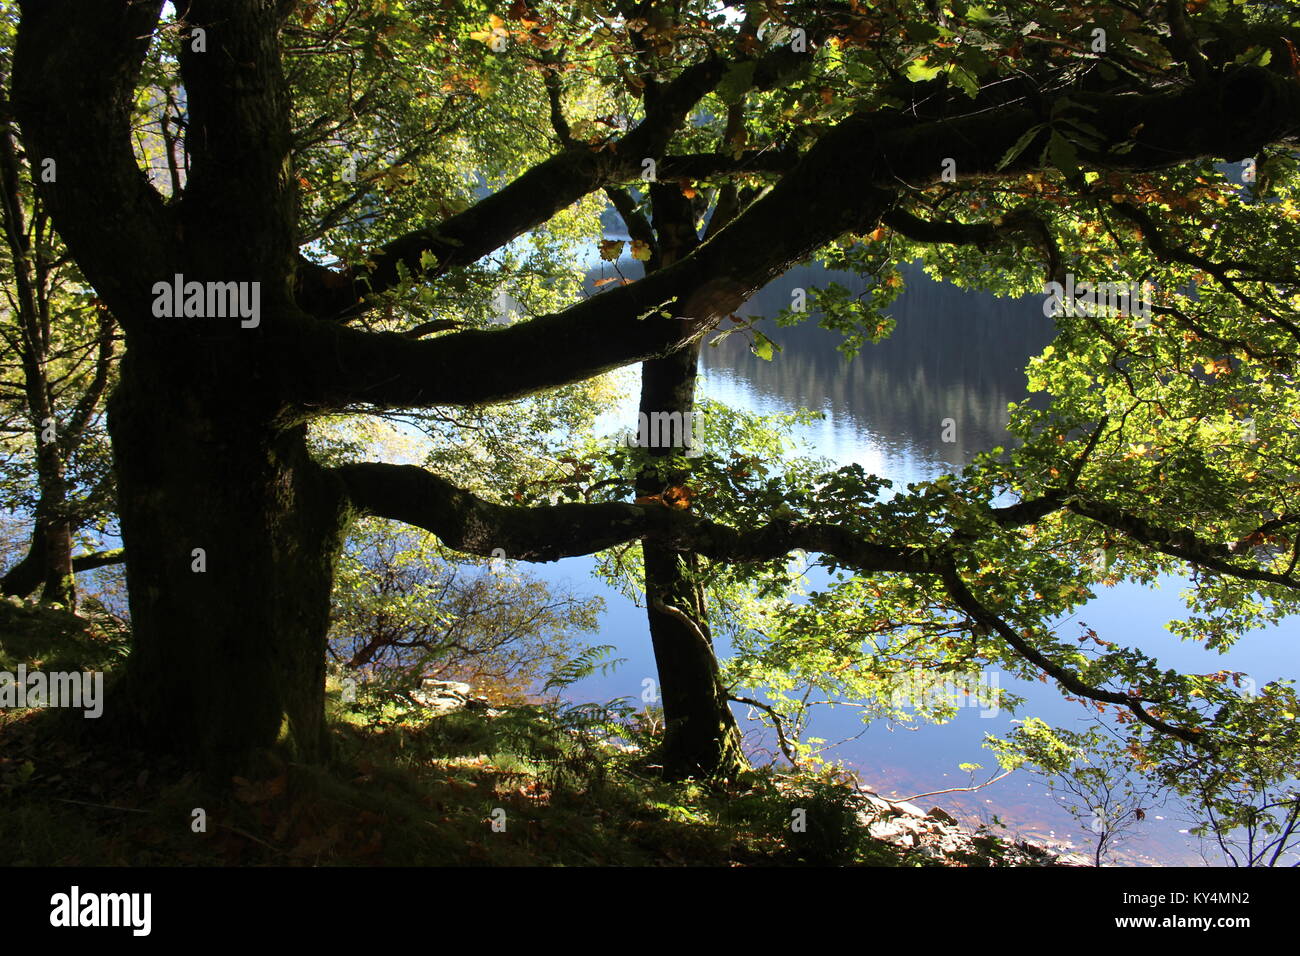 Tree silhouette in the October sunshine with water behind, Garreg Ddu reservoir Elan Valley, Powys, Mid Wales, taken from the path along the reservoir Stock Photo